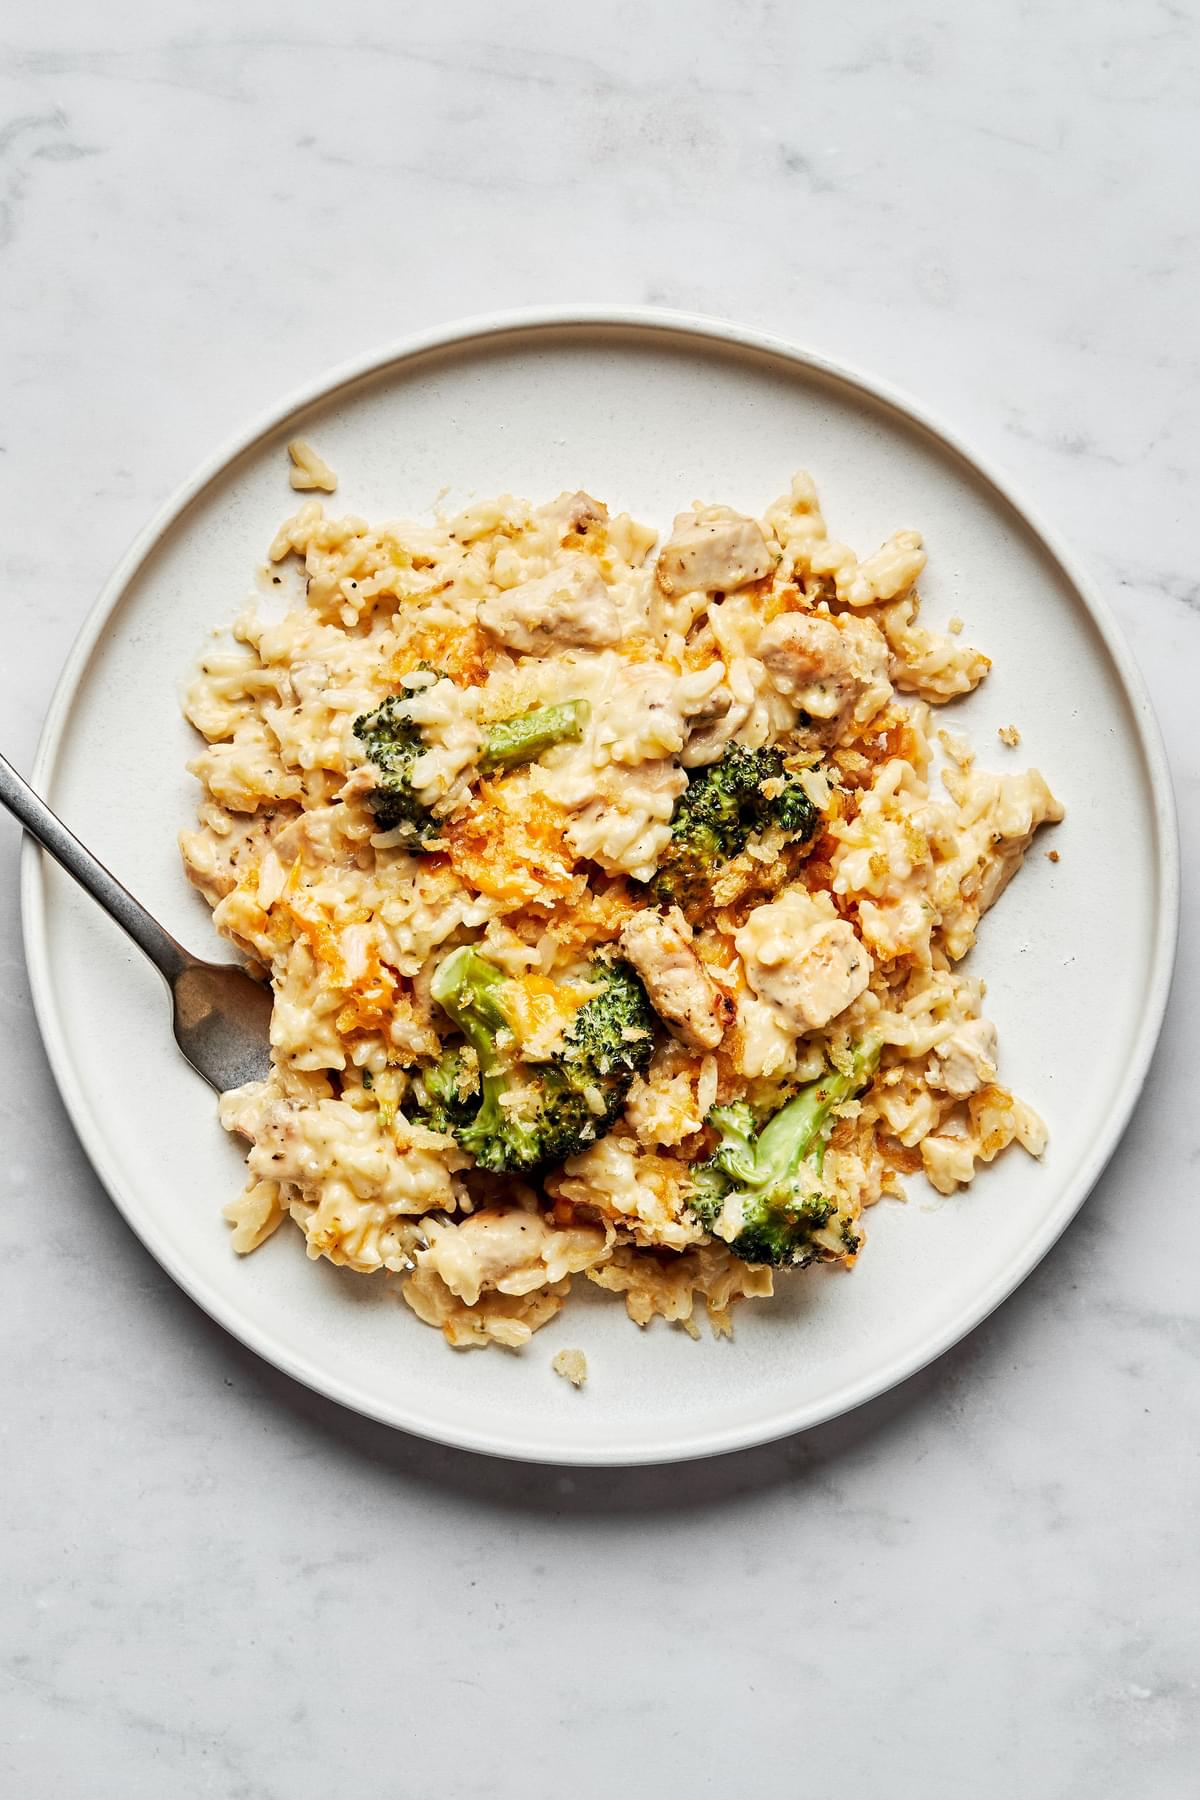 Chicken Broccoli and Rice Casserole topped with toasted panko breadcrumbs on a plate with a fork